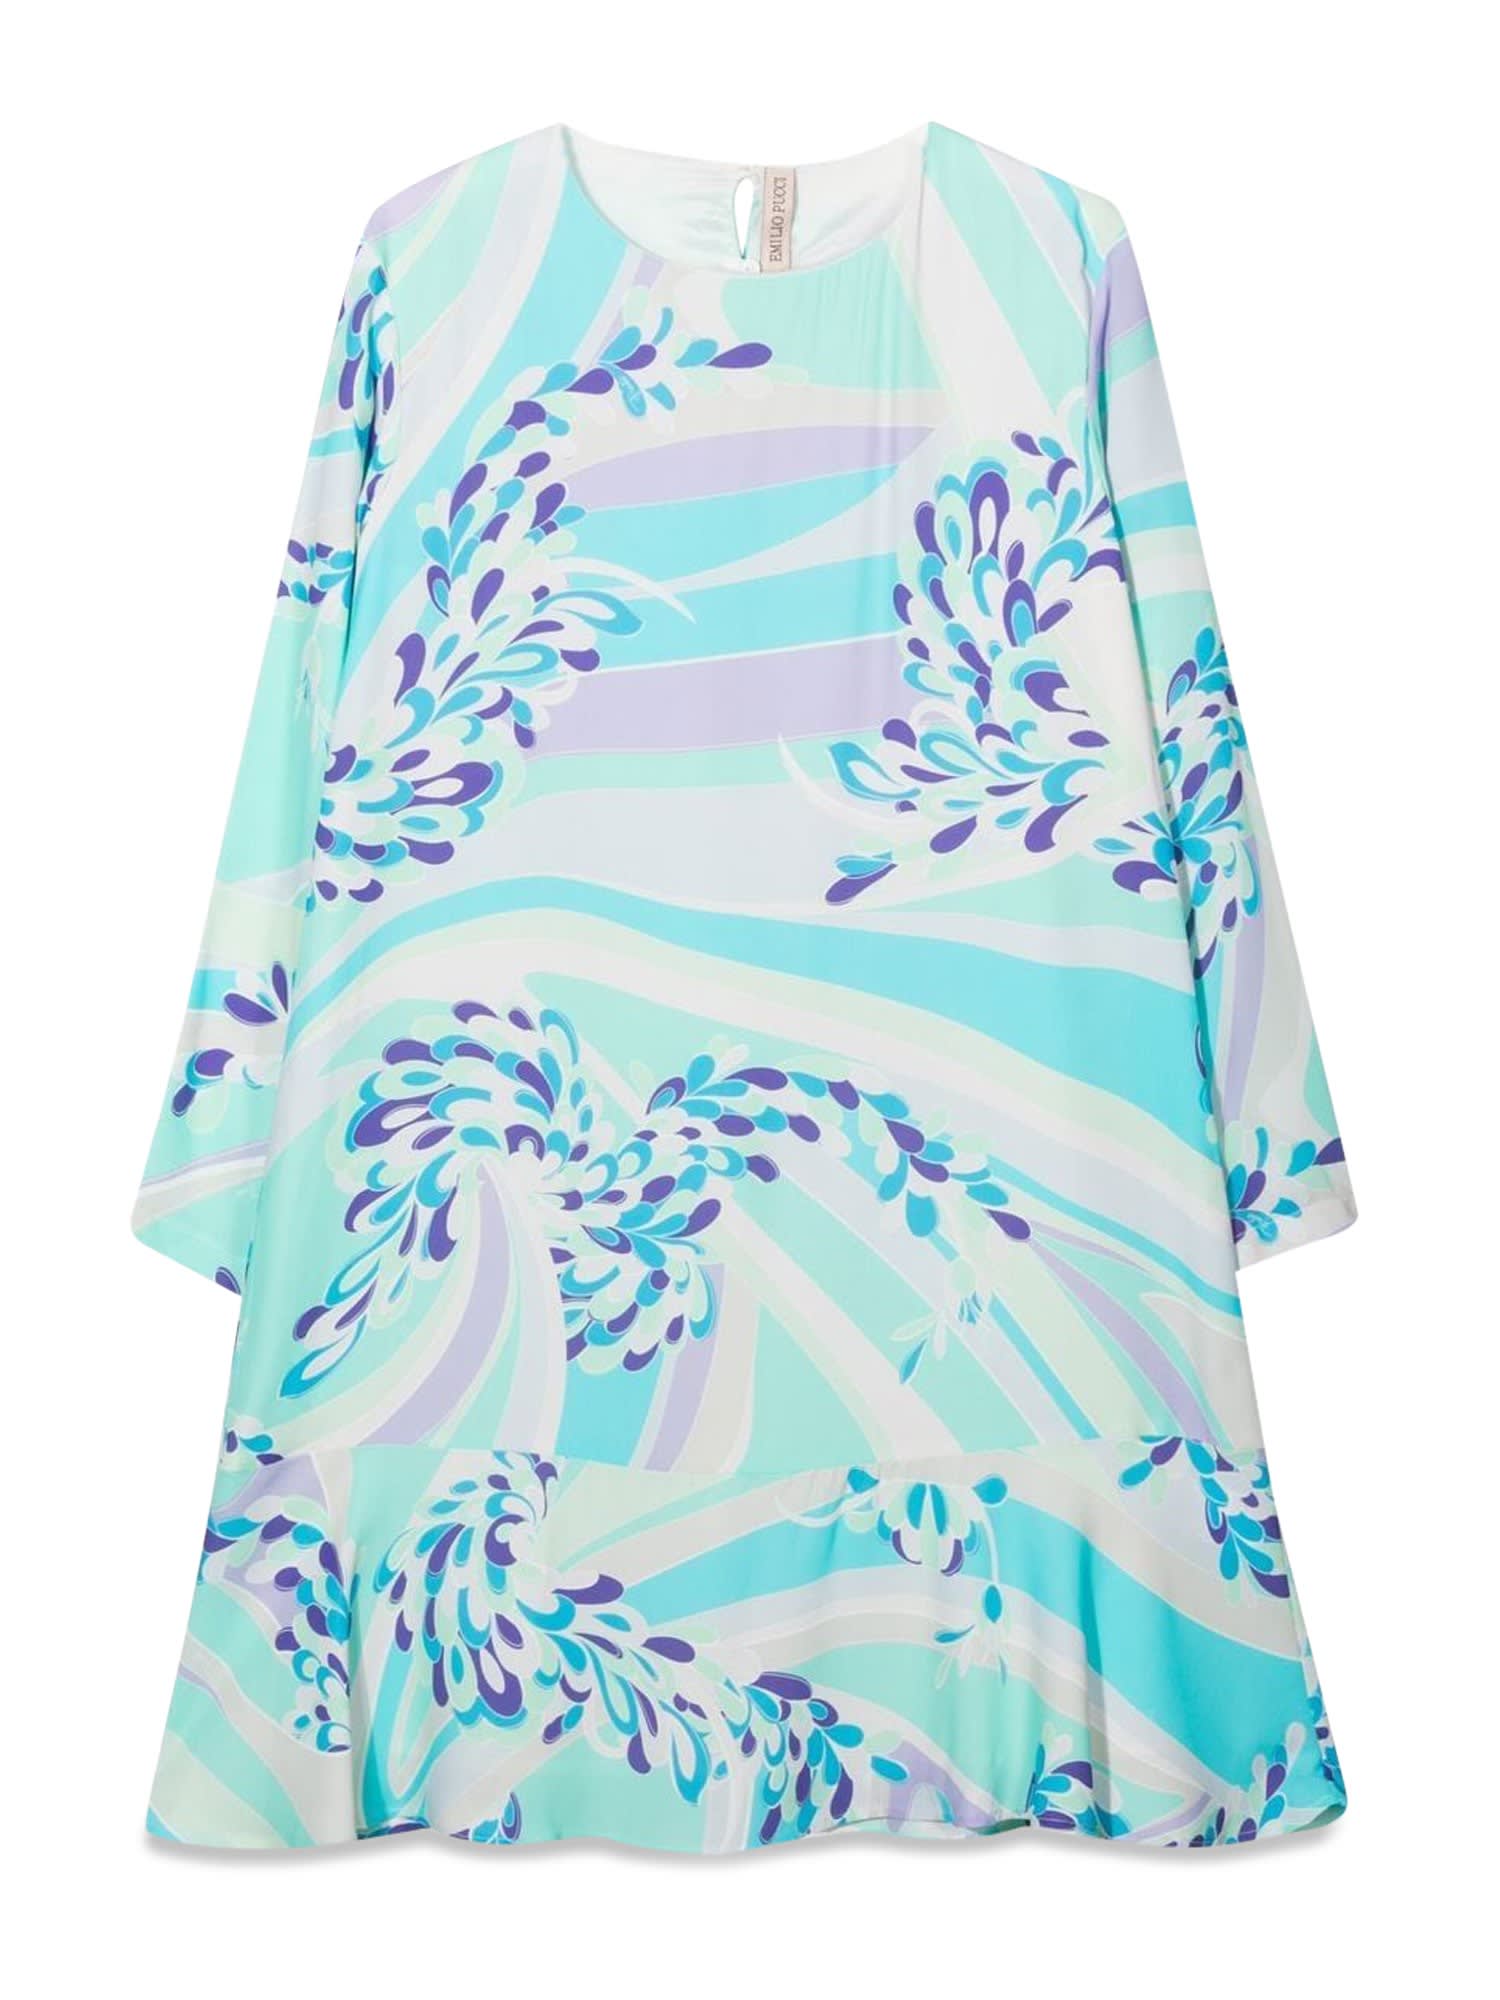 EMILIO PUCCI DRESS WITH SOFT SKIRT